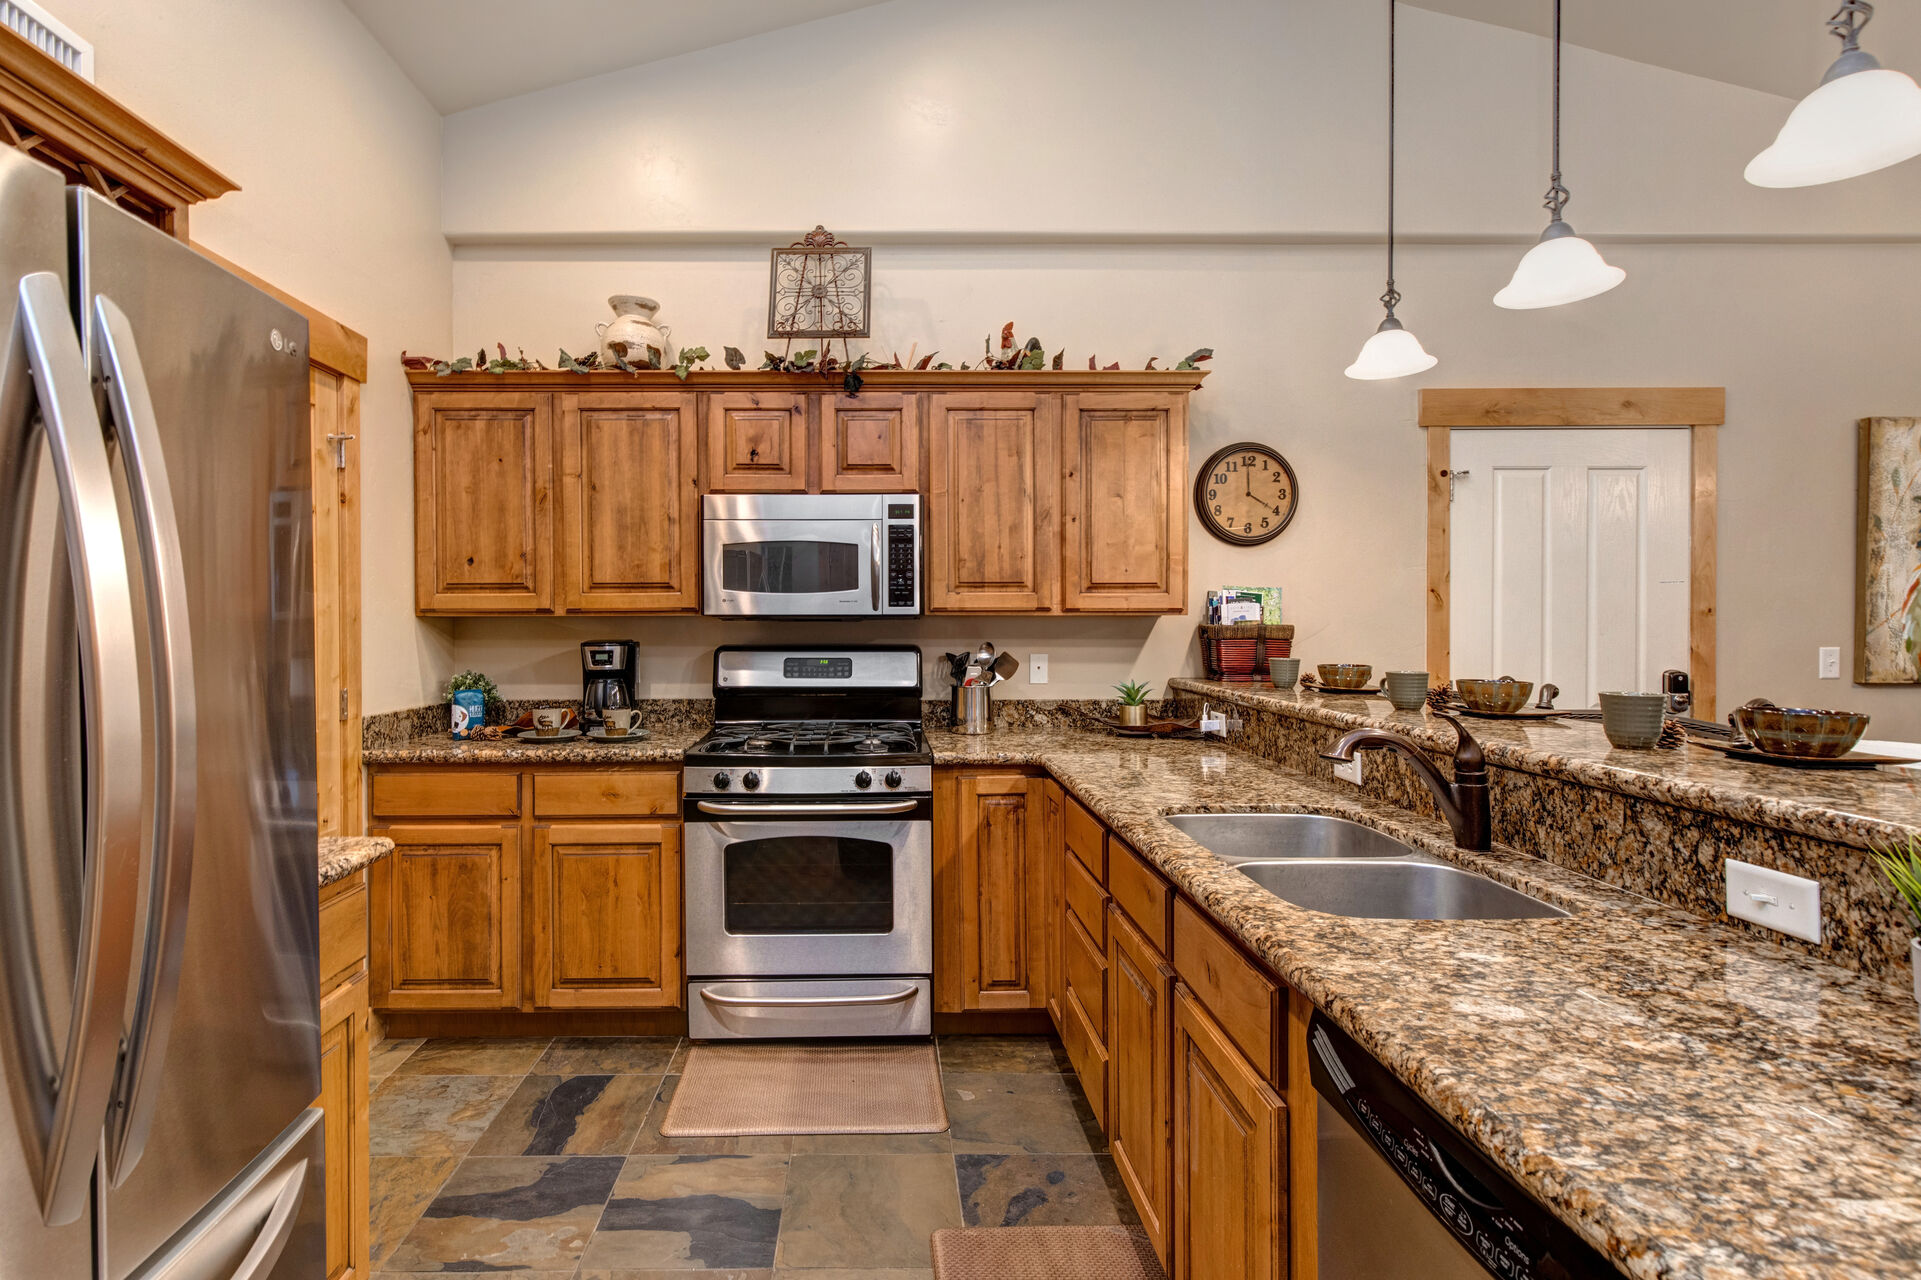 Fully Equipped Kitchen with beautiful stone countertops, stainless steel appliances, and bar seating for four